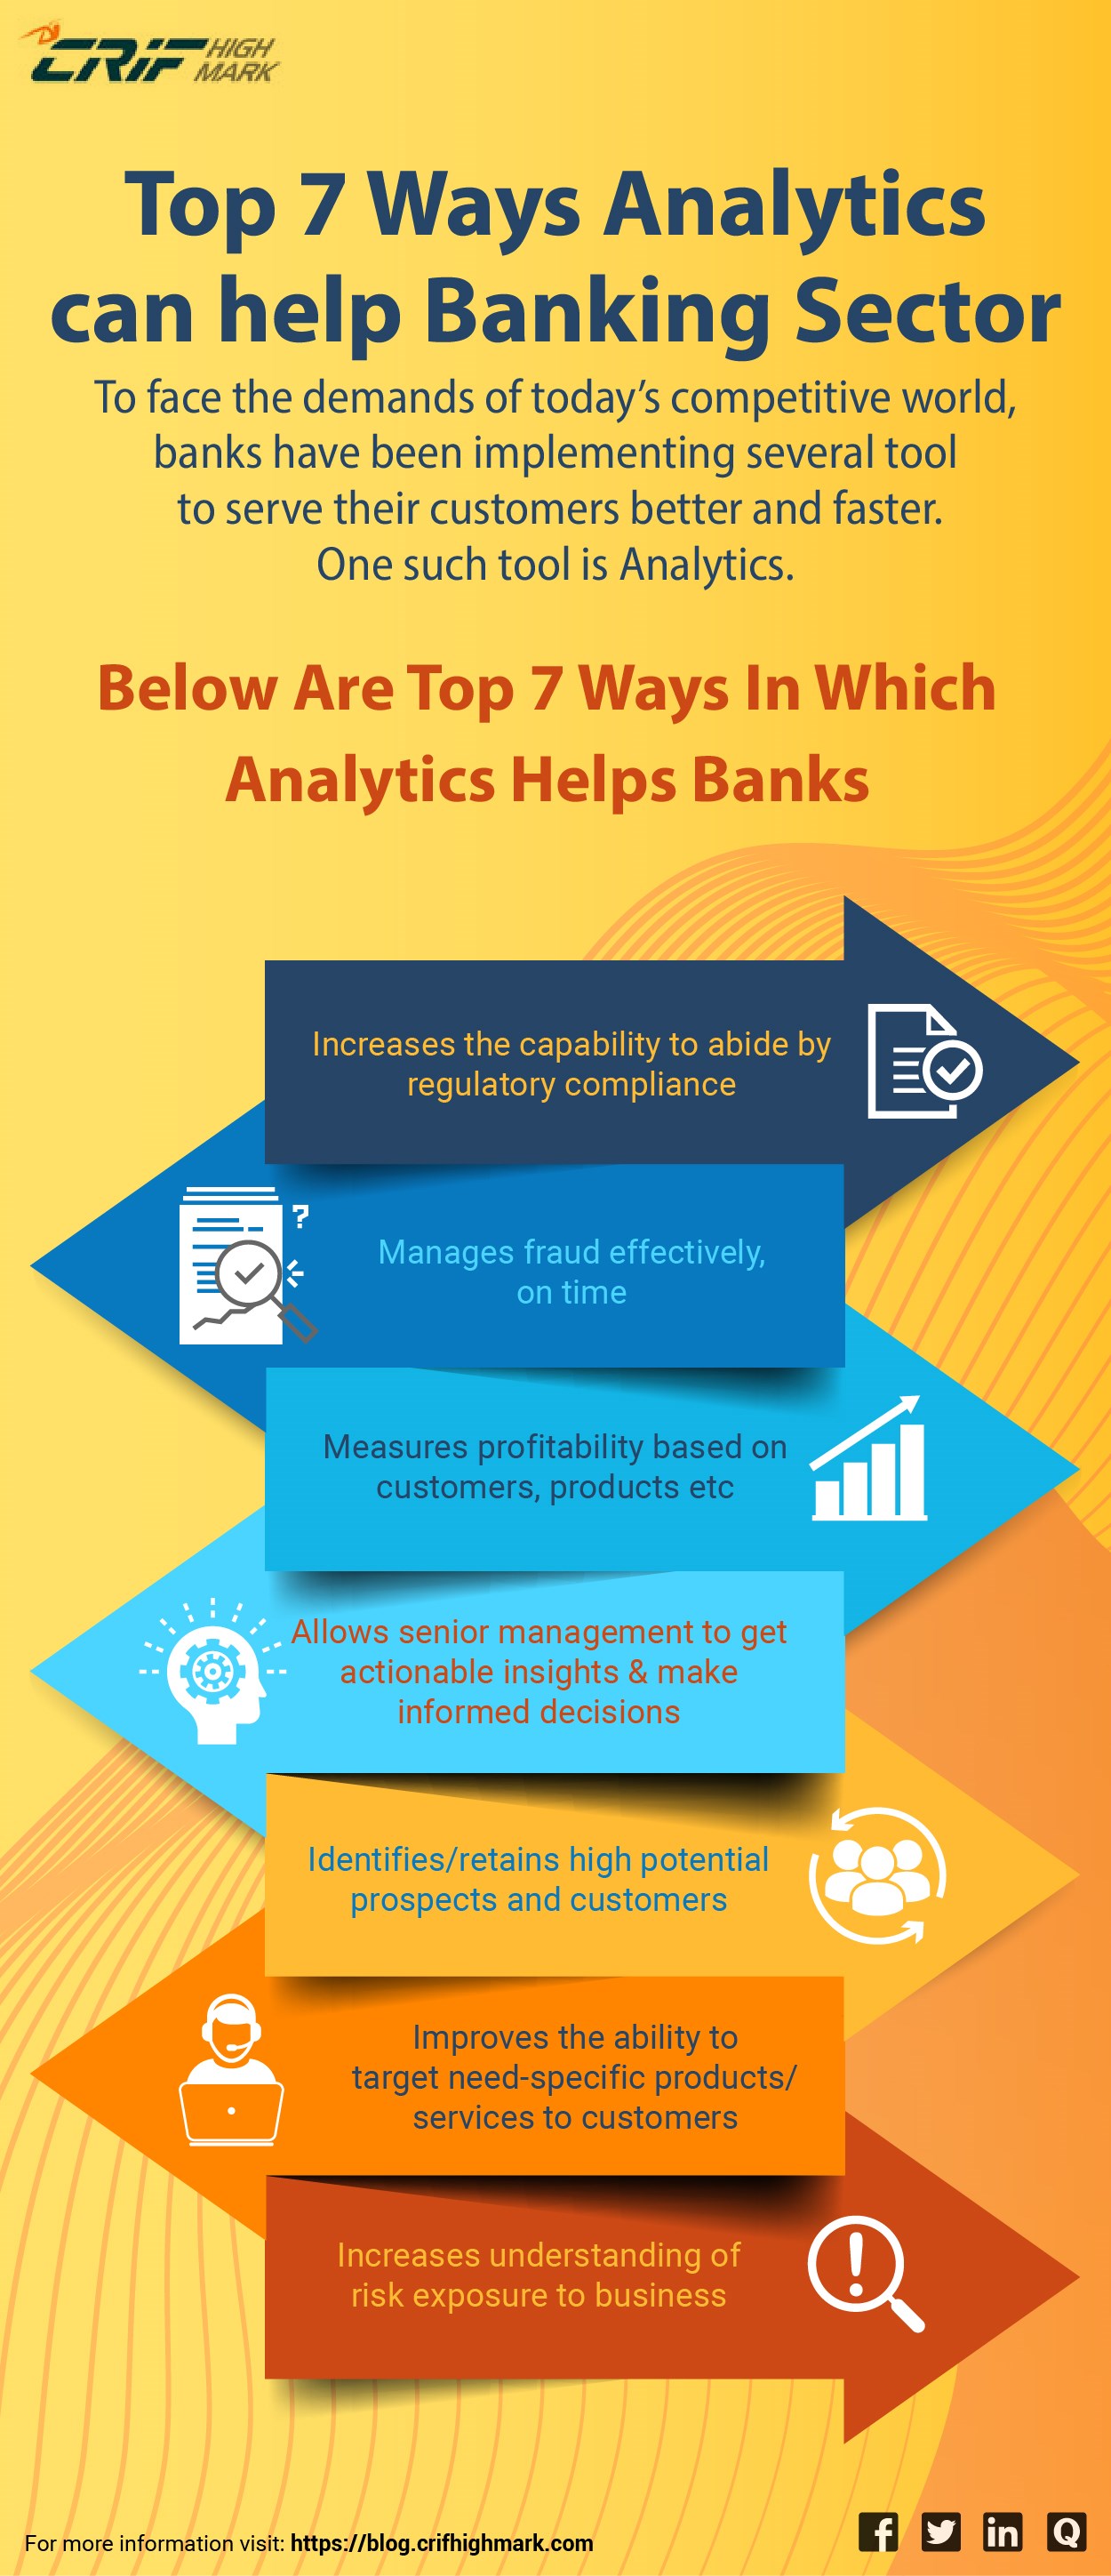 Ways analytics can help the banking sector